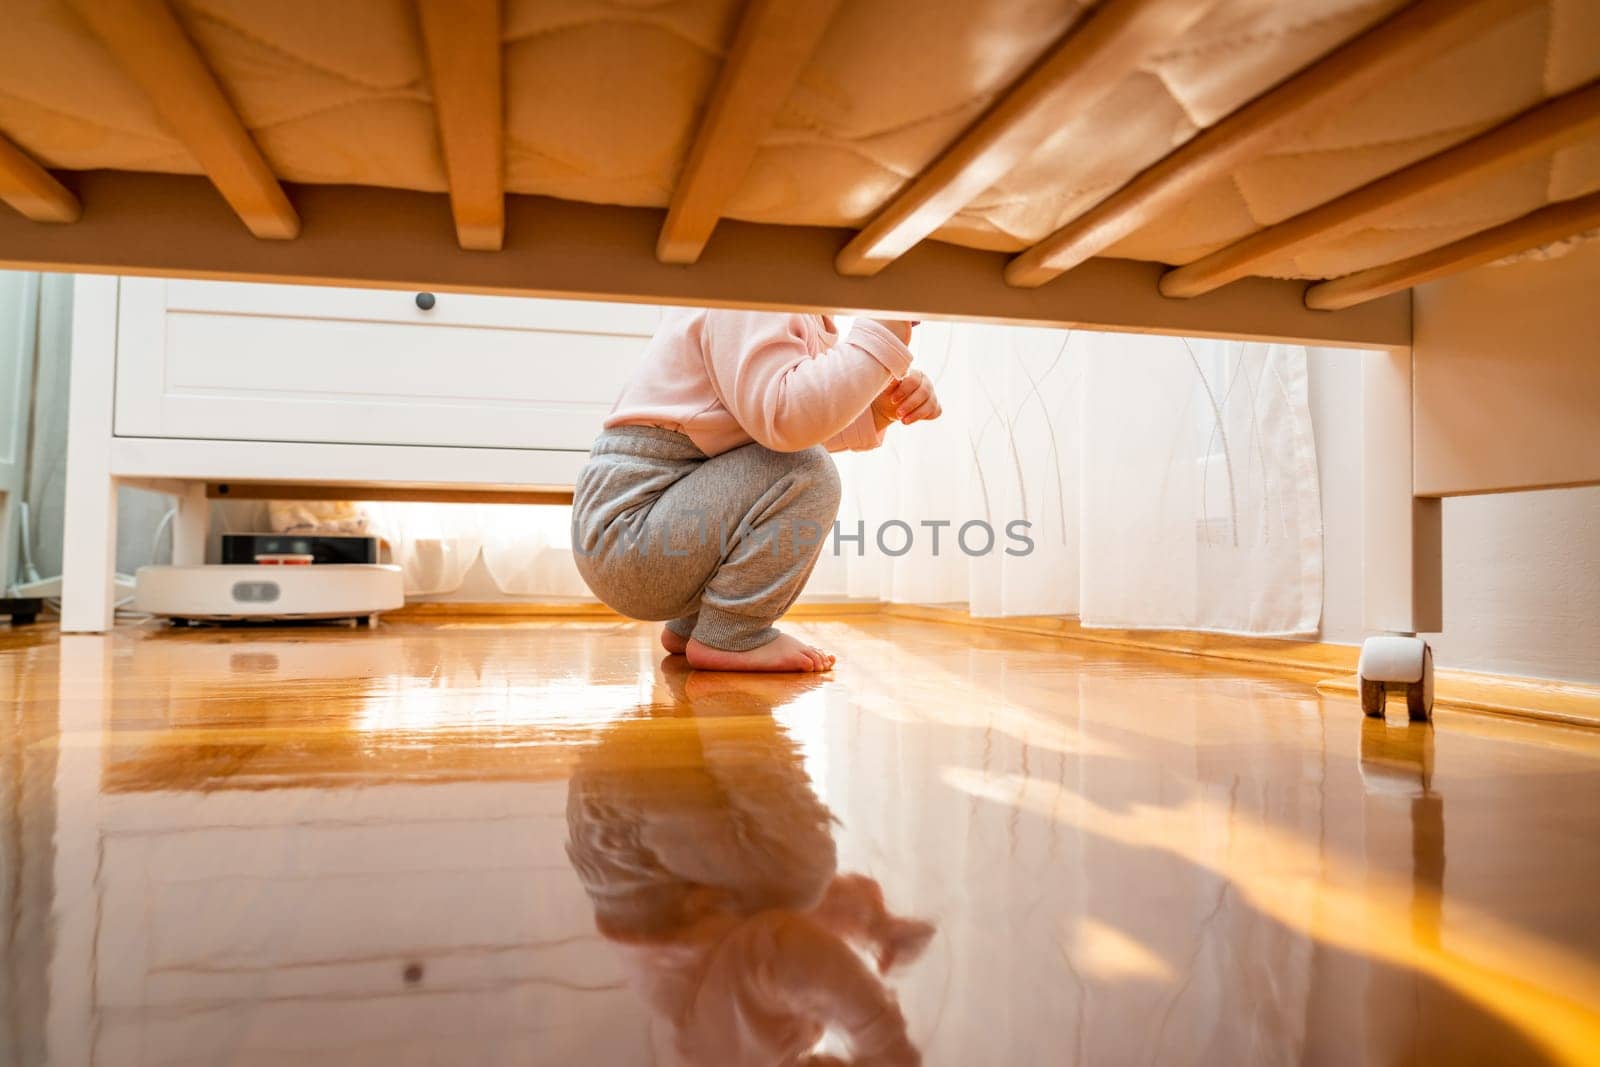 The baby sat down on the parquet floor, photographed from the floor. Hidden frame concept by sdf_qwe